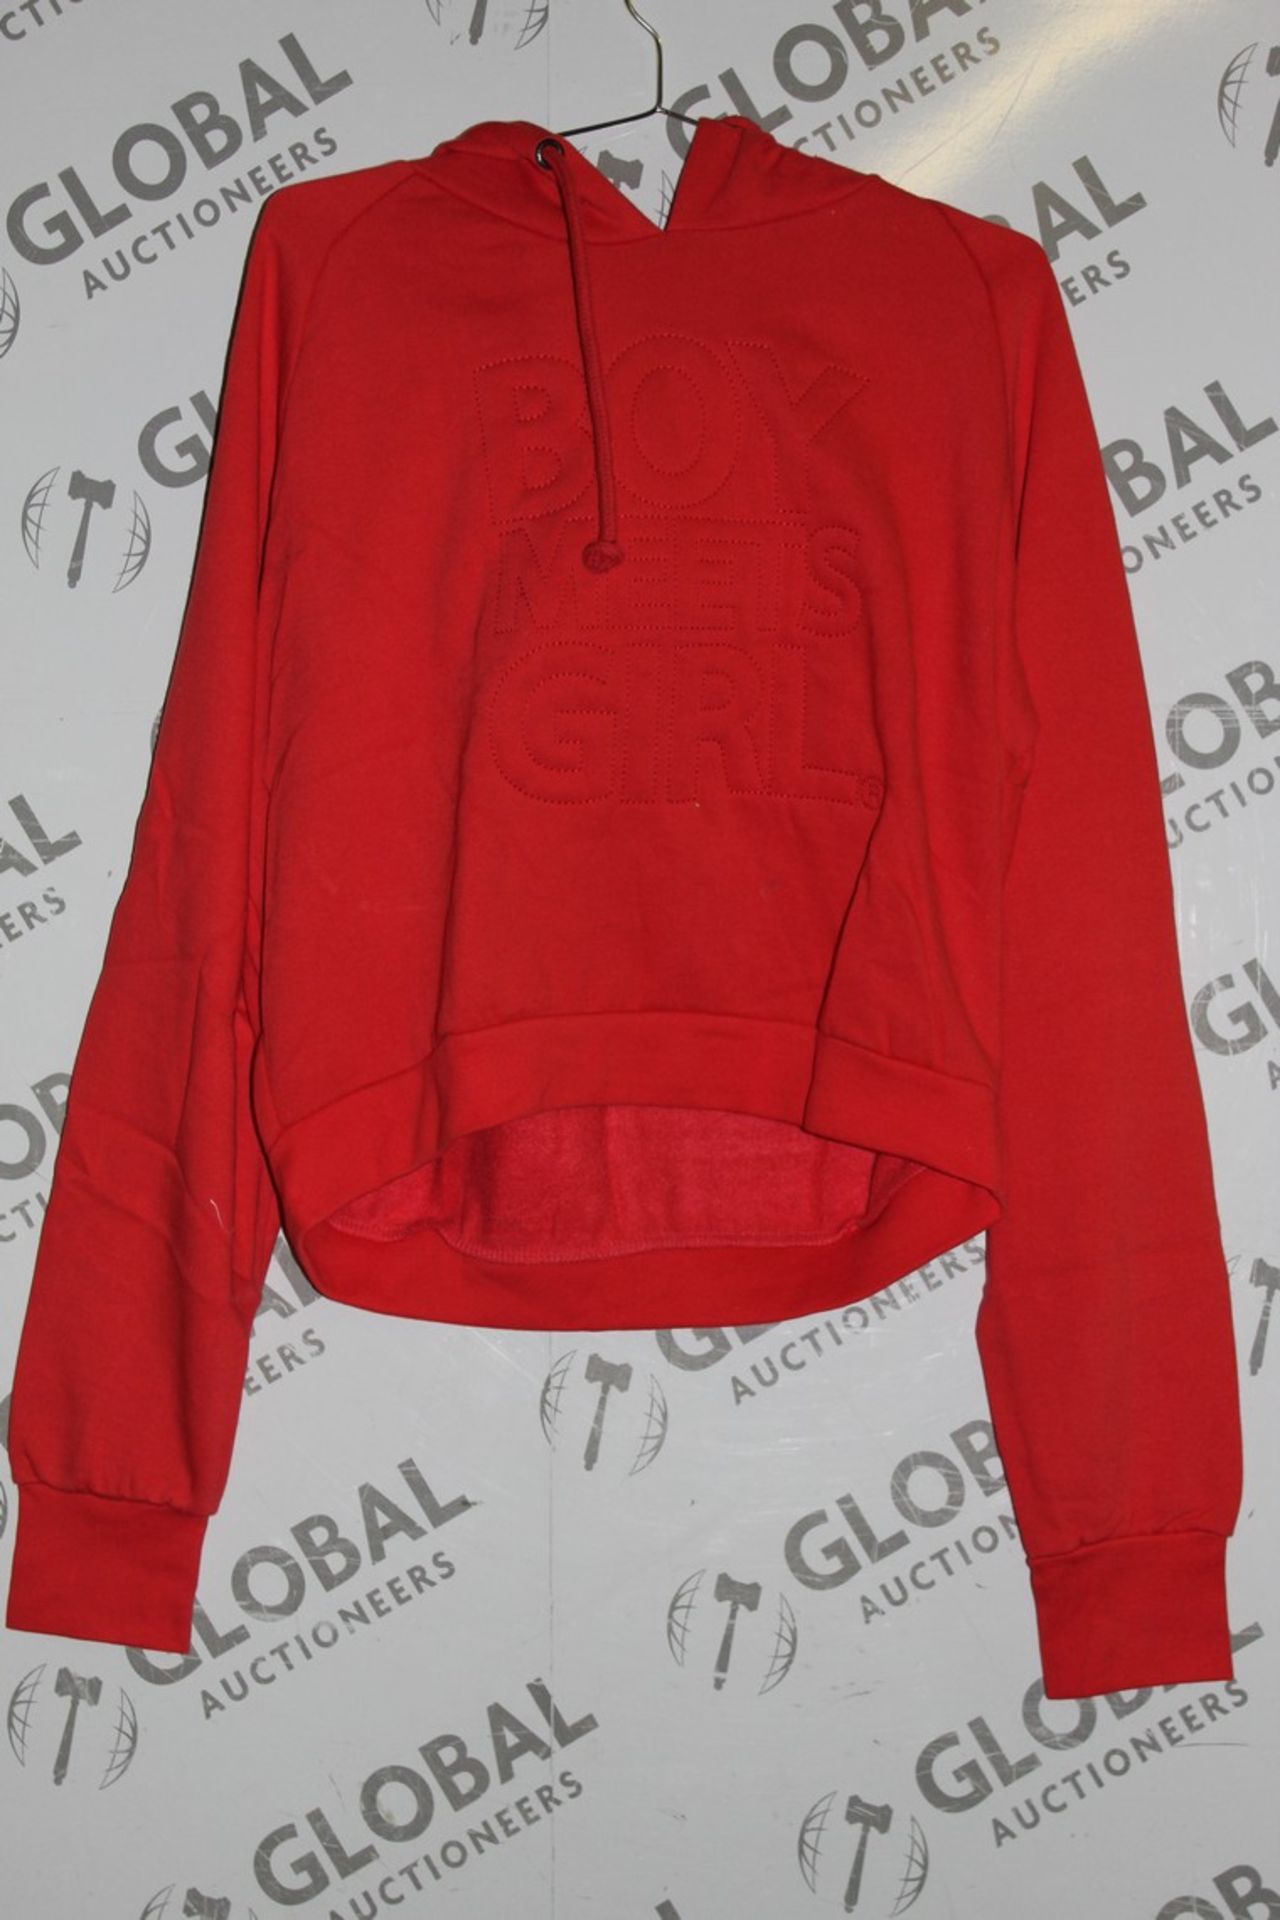 Lot to Contain 19 Brand New Boy Meets Girl Red Hooded Jumpers RRP £19.99 Each Combined RRP £379.81